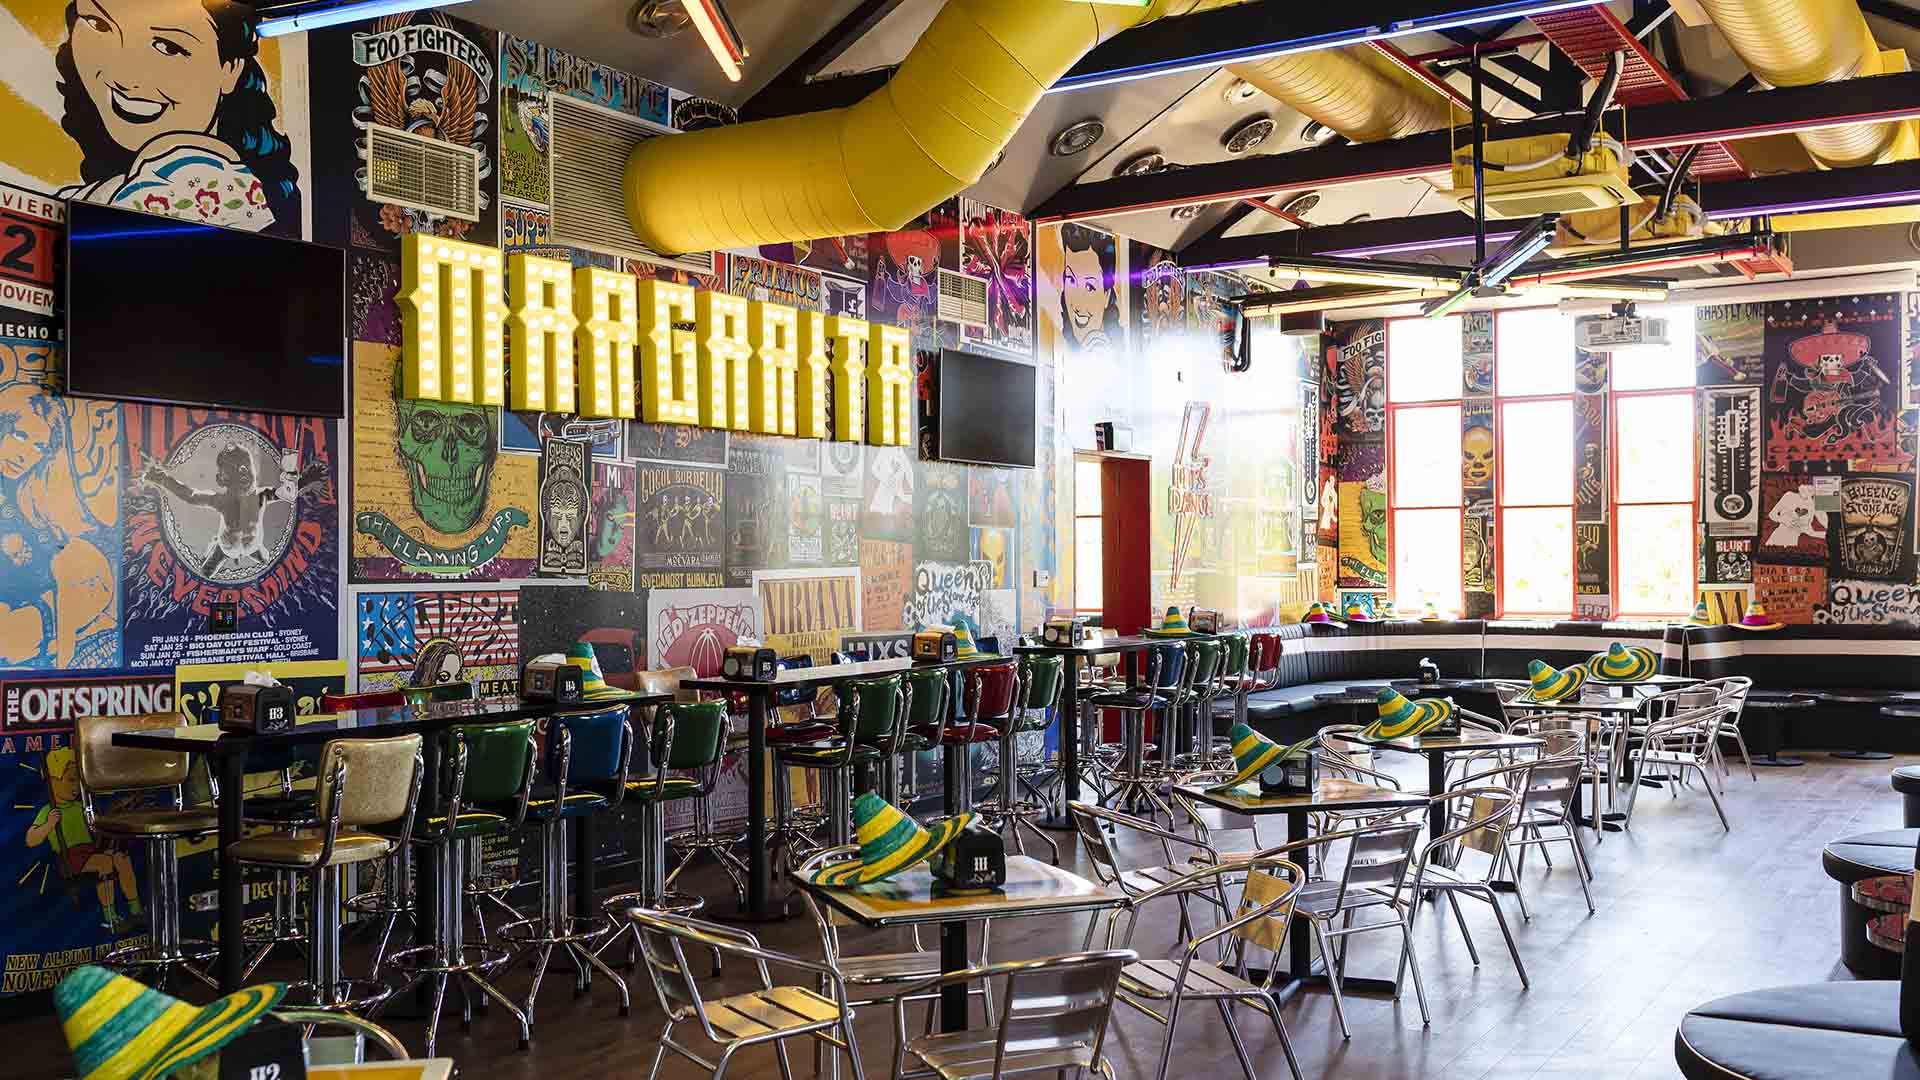 El Camino Cantina Has Opened a New Two-Level South Bank Joint with DJs and a Dance Floor